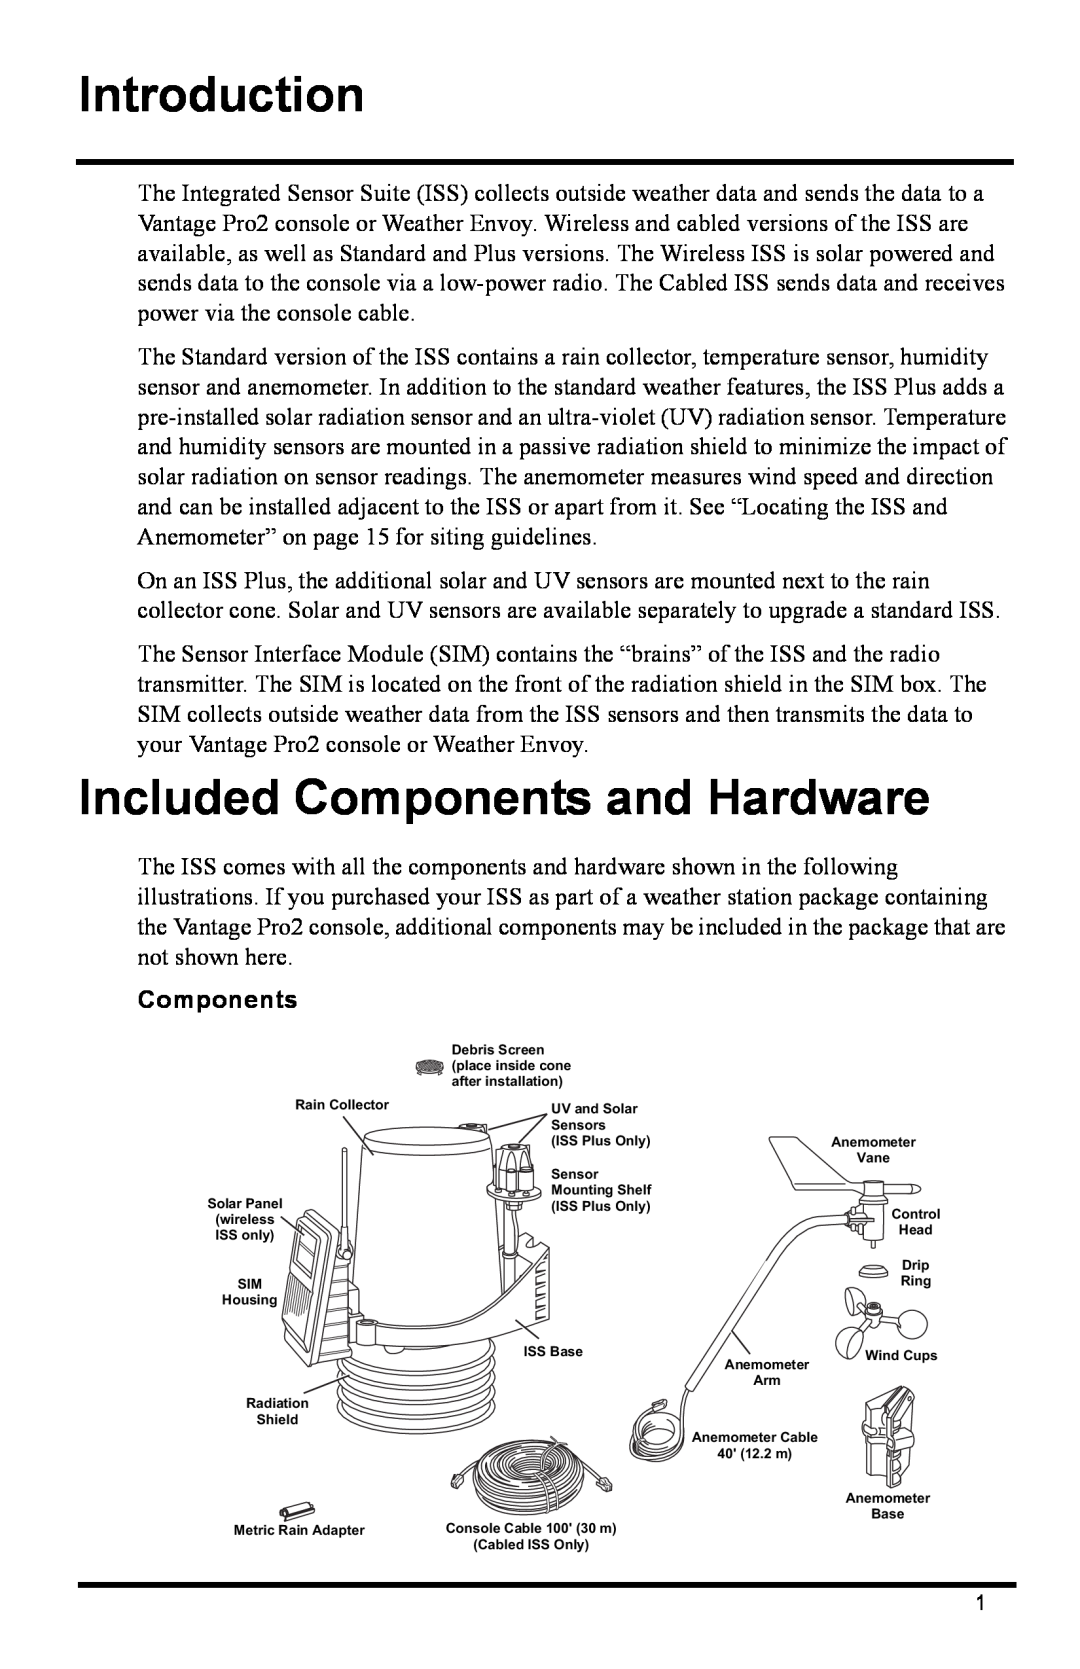 DAVIS 6322C installation manual Introduction, Included Components and Hardware 